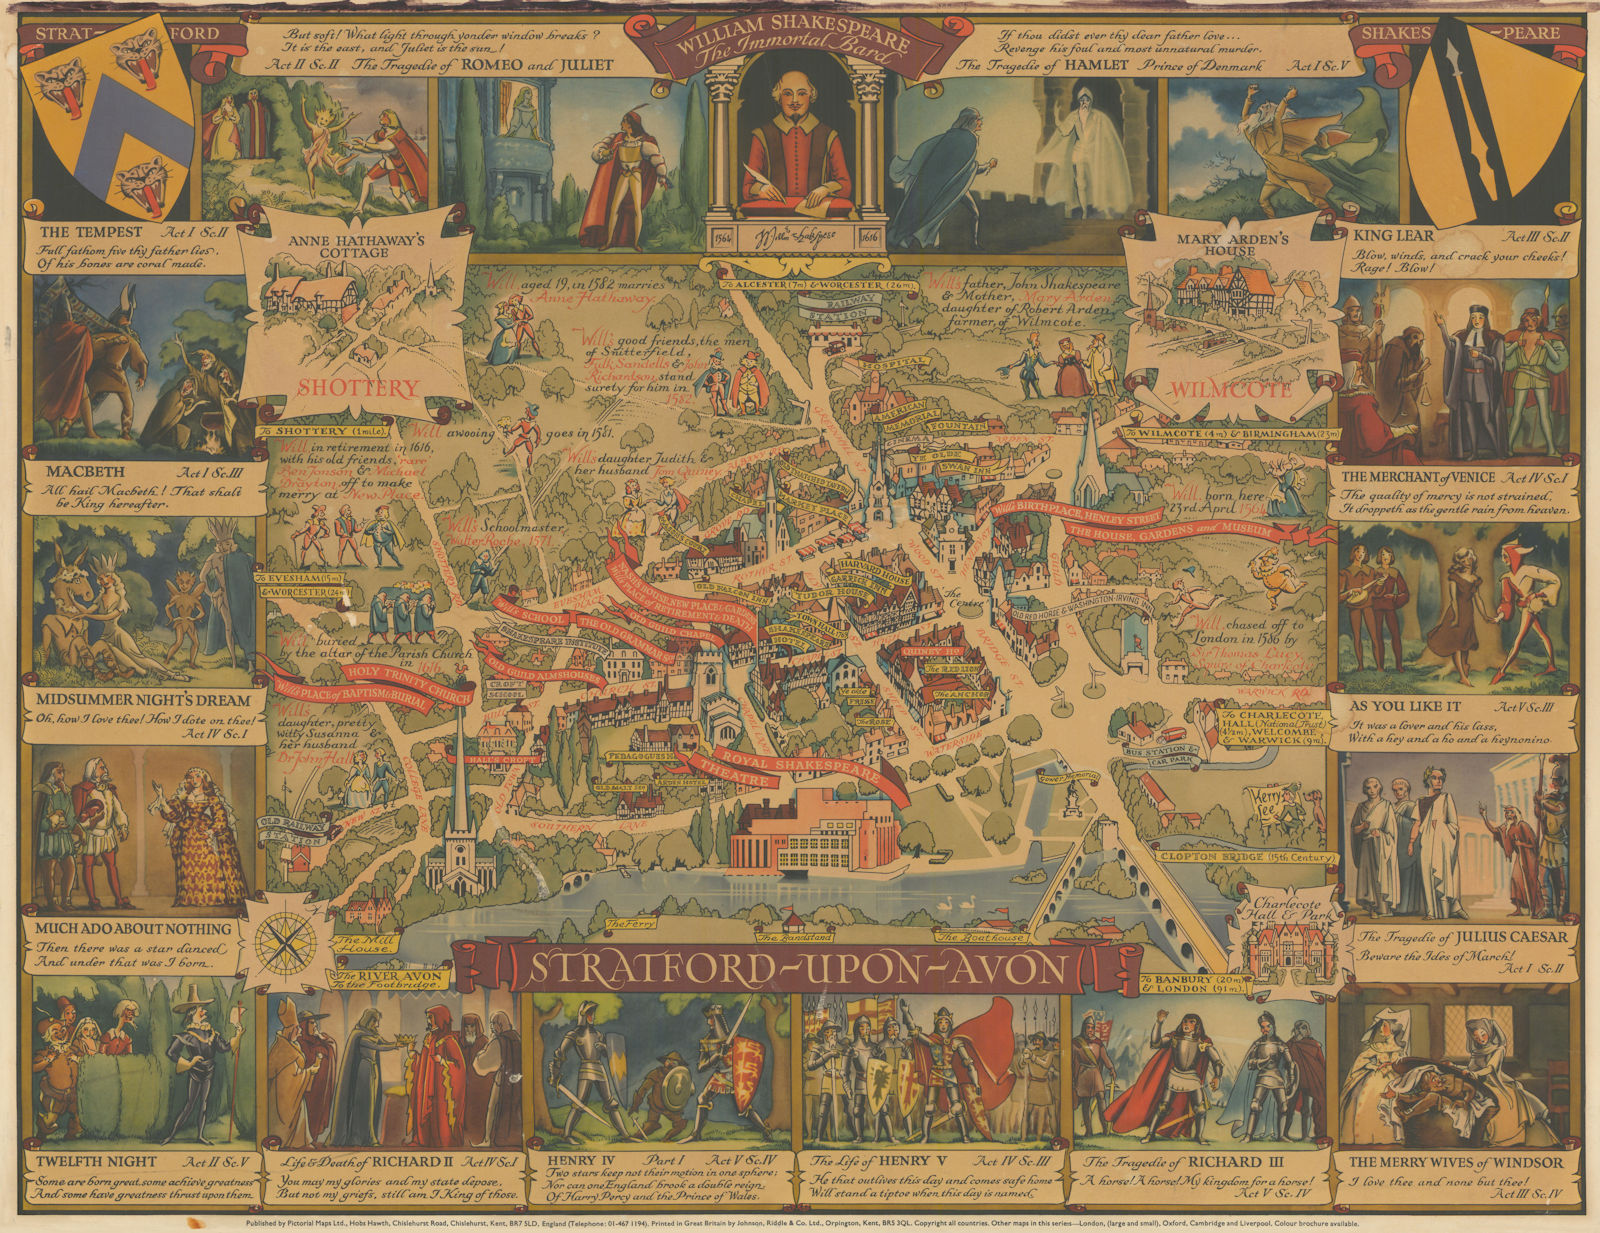 Associate Product Stratford-upon-Avon & William Shakespeare's life. Kerry Lee pictorial map c1965